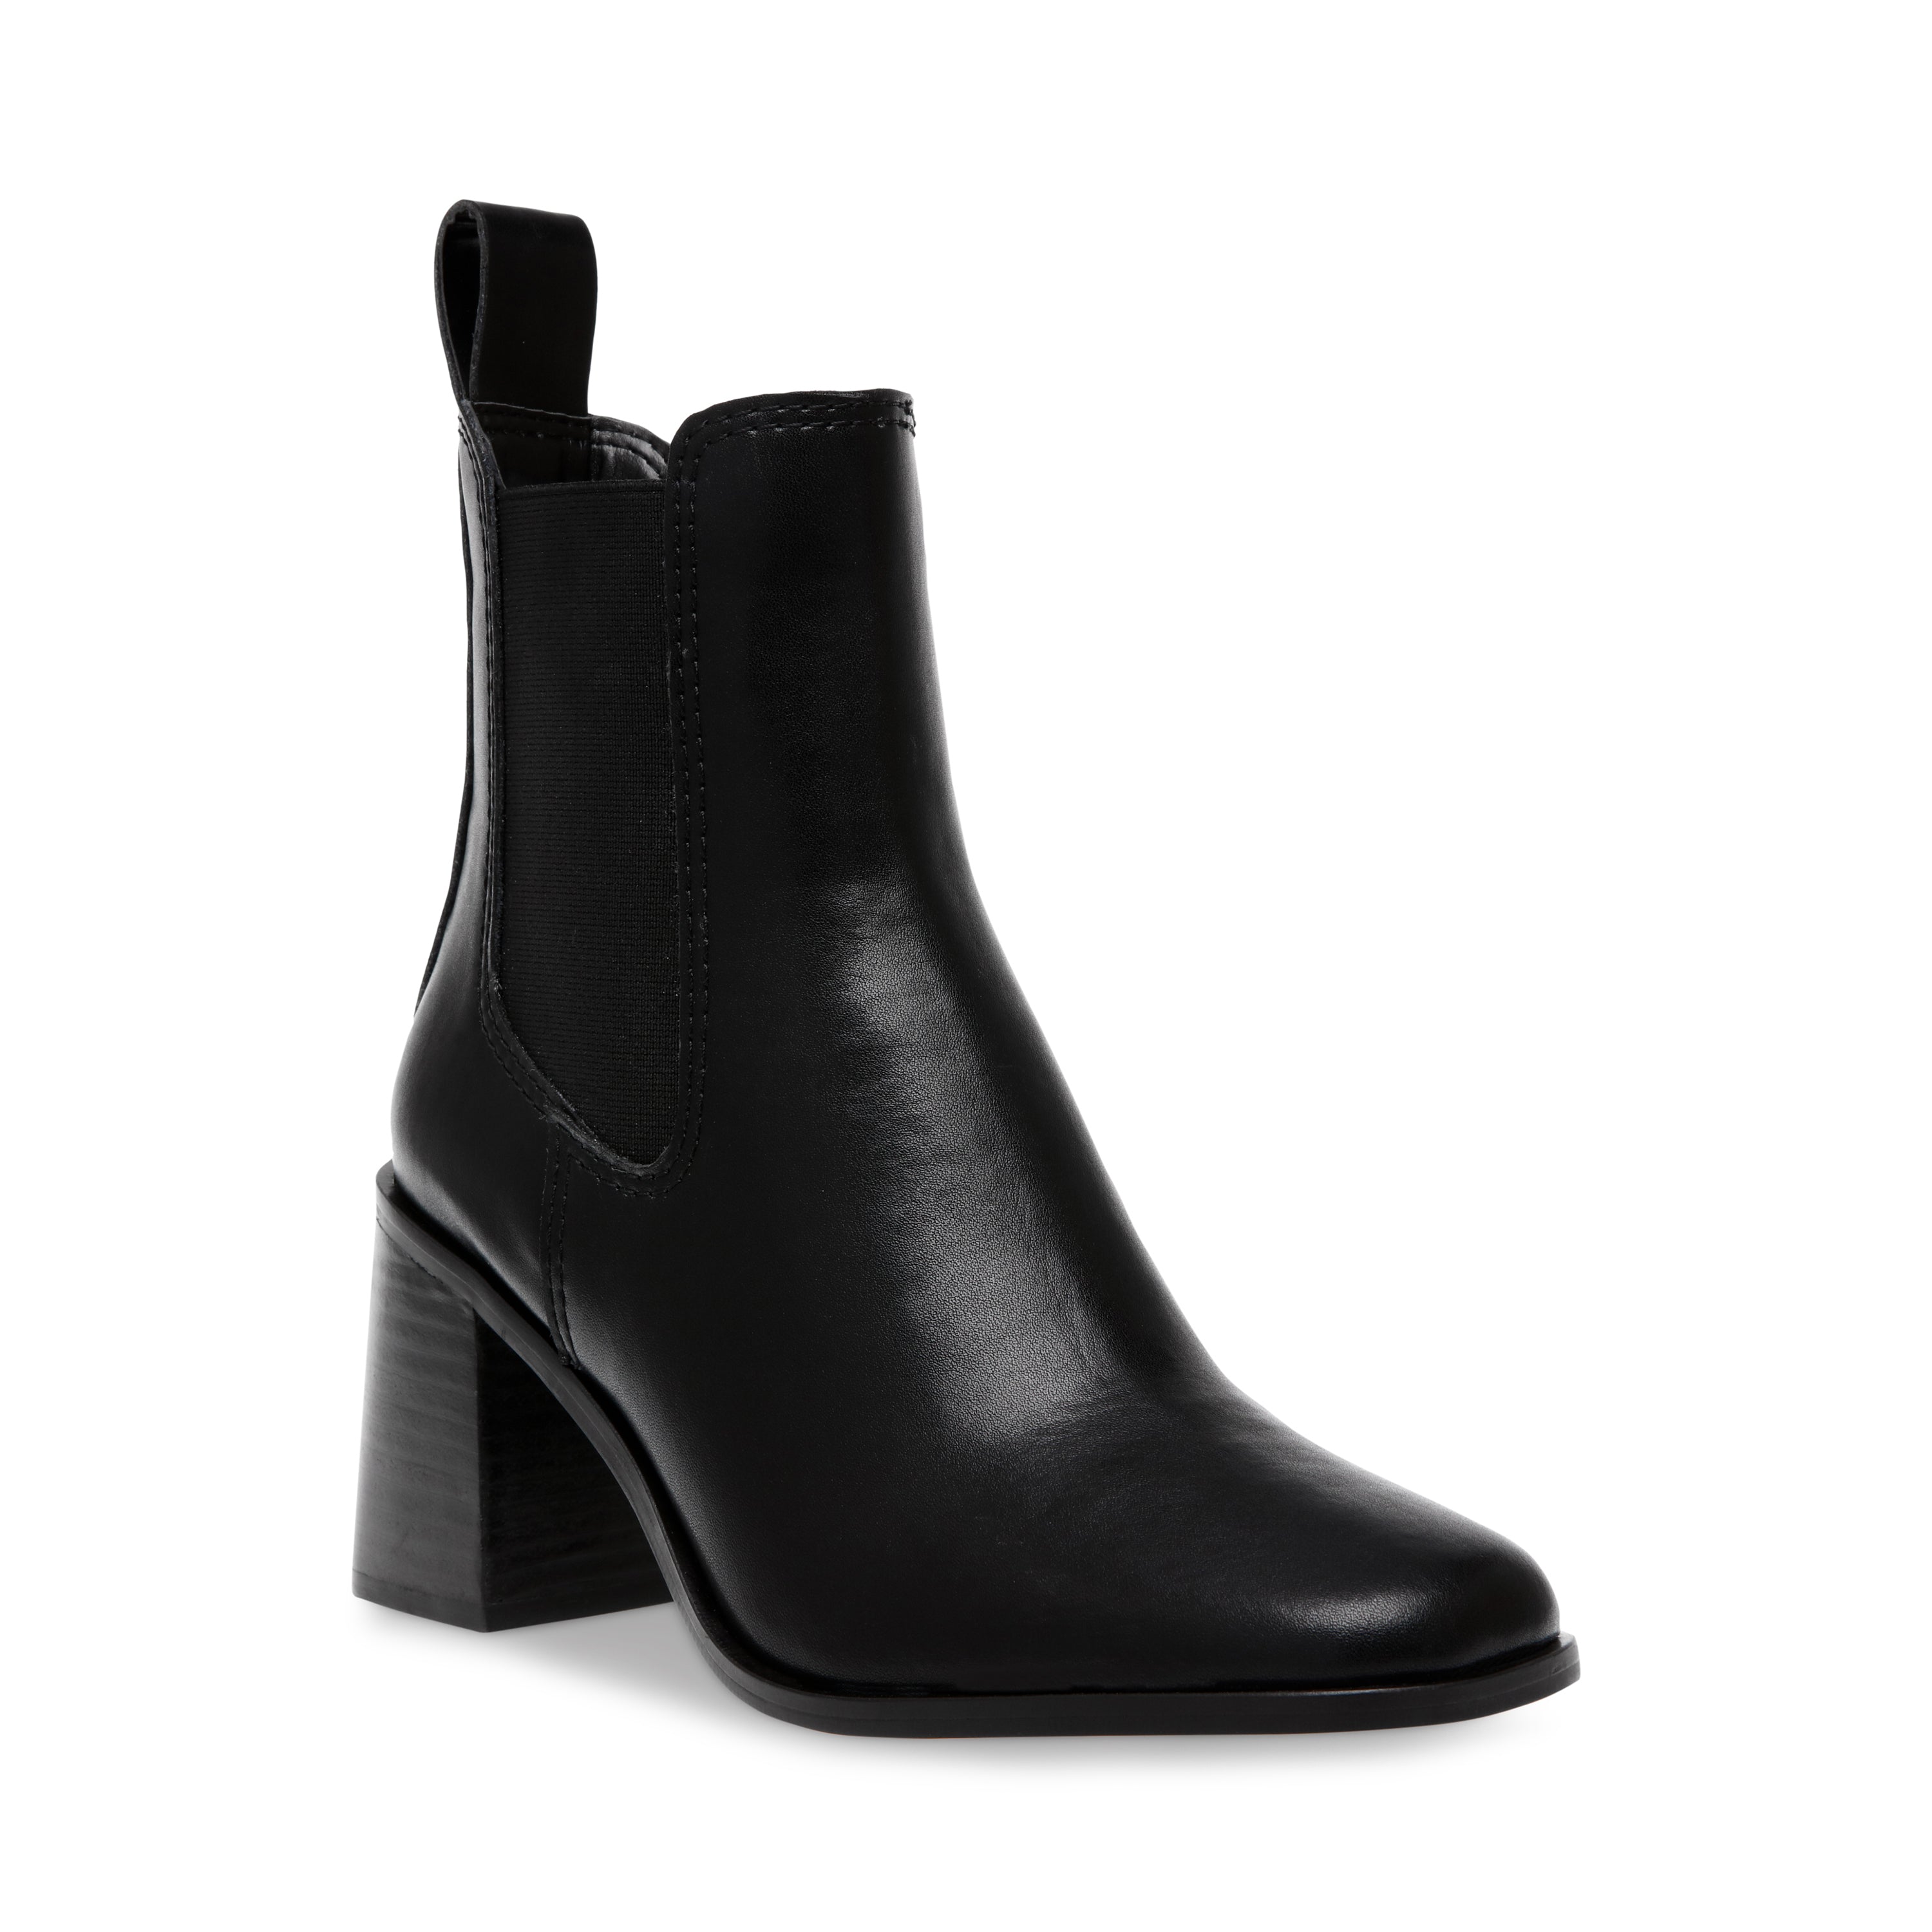 Achiever Bootie Black Action Leather- Hover Image